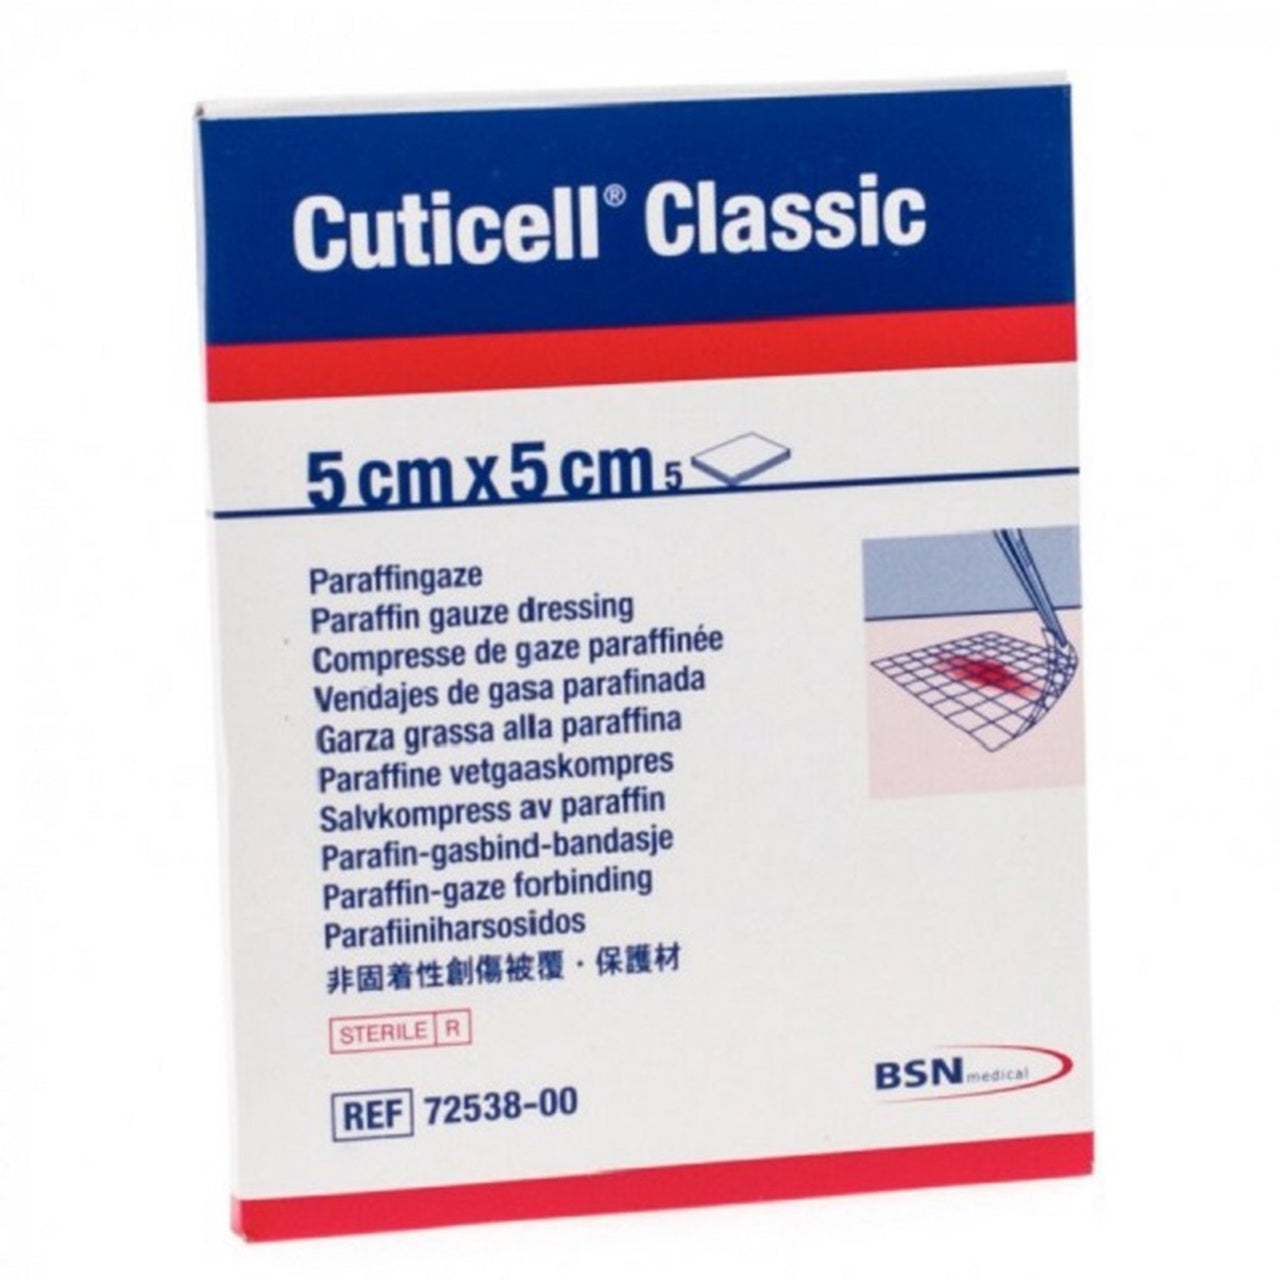 Cuticell Classic Non-Adh Dressing Impregnated W/Paraffin 5cm X 5cm (Retail Pack) - Box Of 5 - Home Health Store Inc